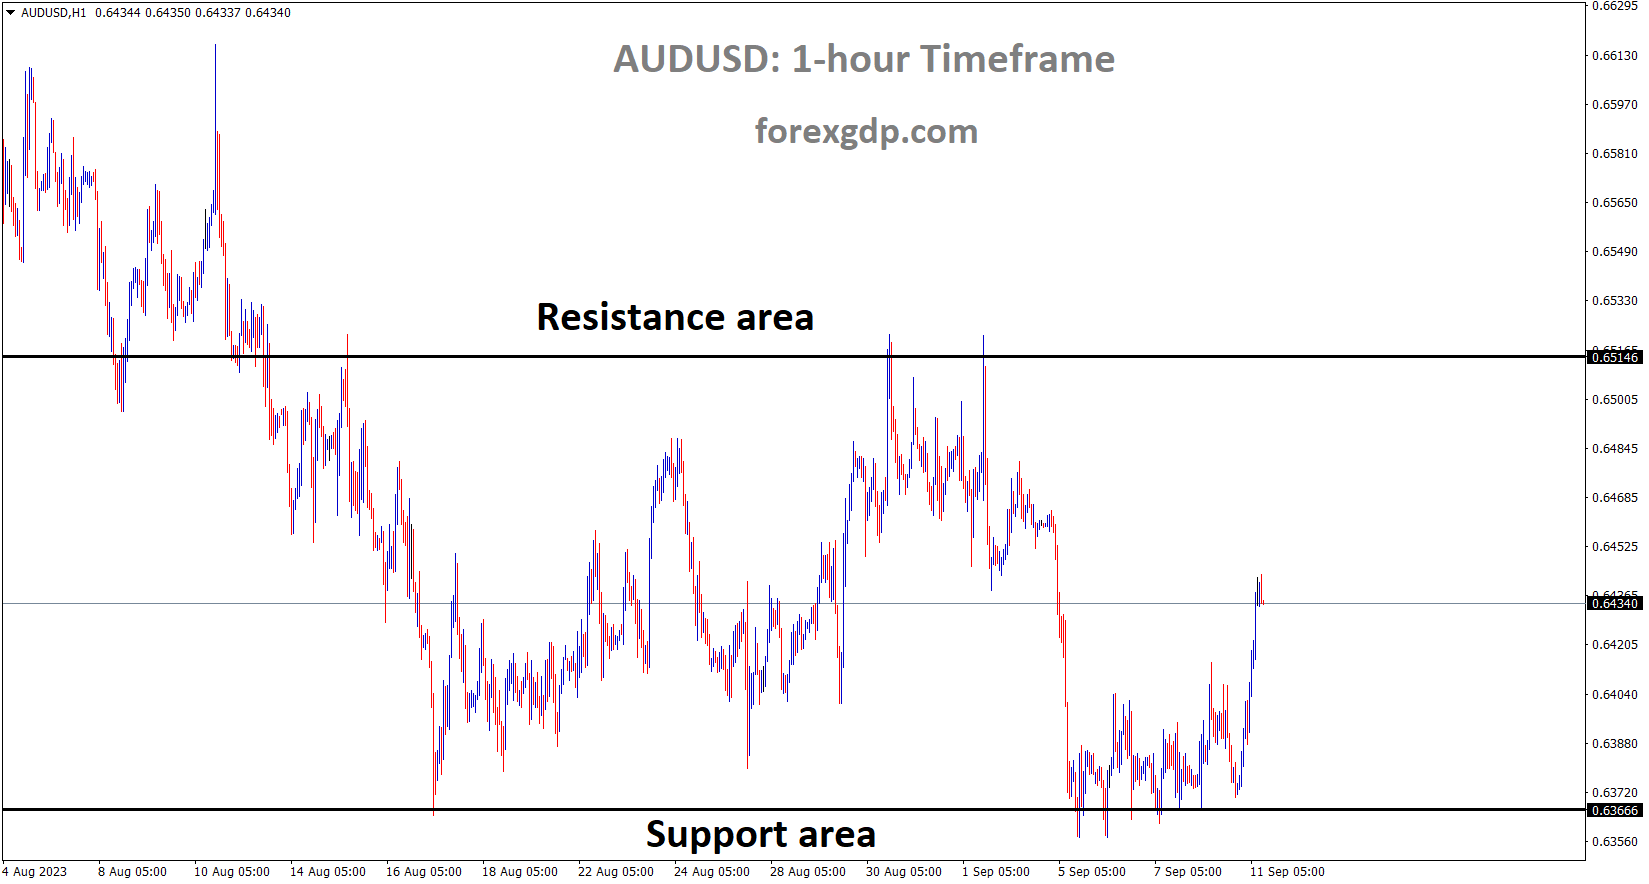 AUDUSD is moving in the Box pattern and the market has rebounded from the horizontal support area of the pattern